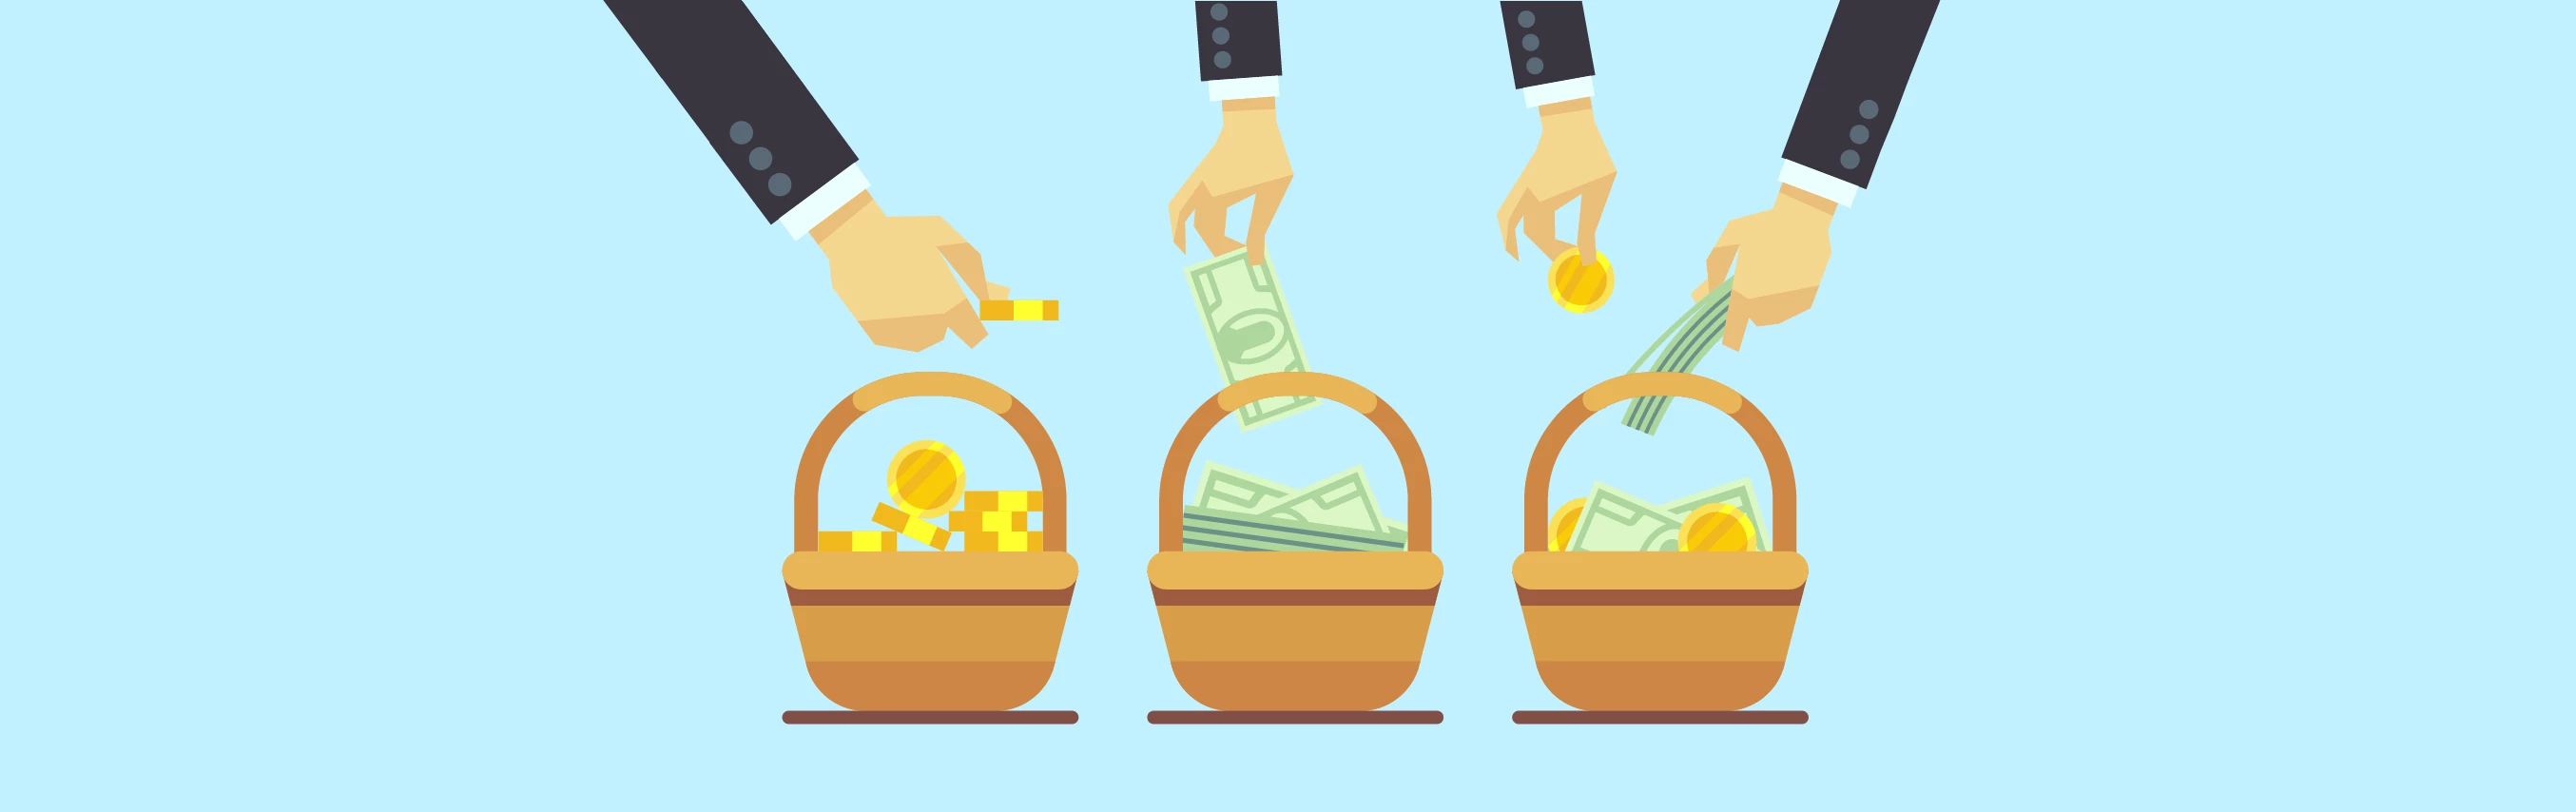 Horizontal Clipart Image of hands putting money in a basket